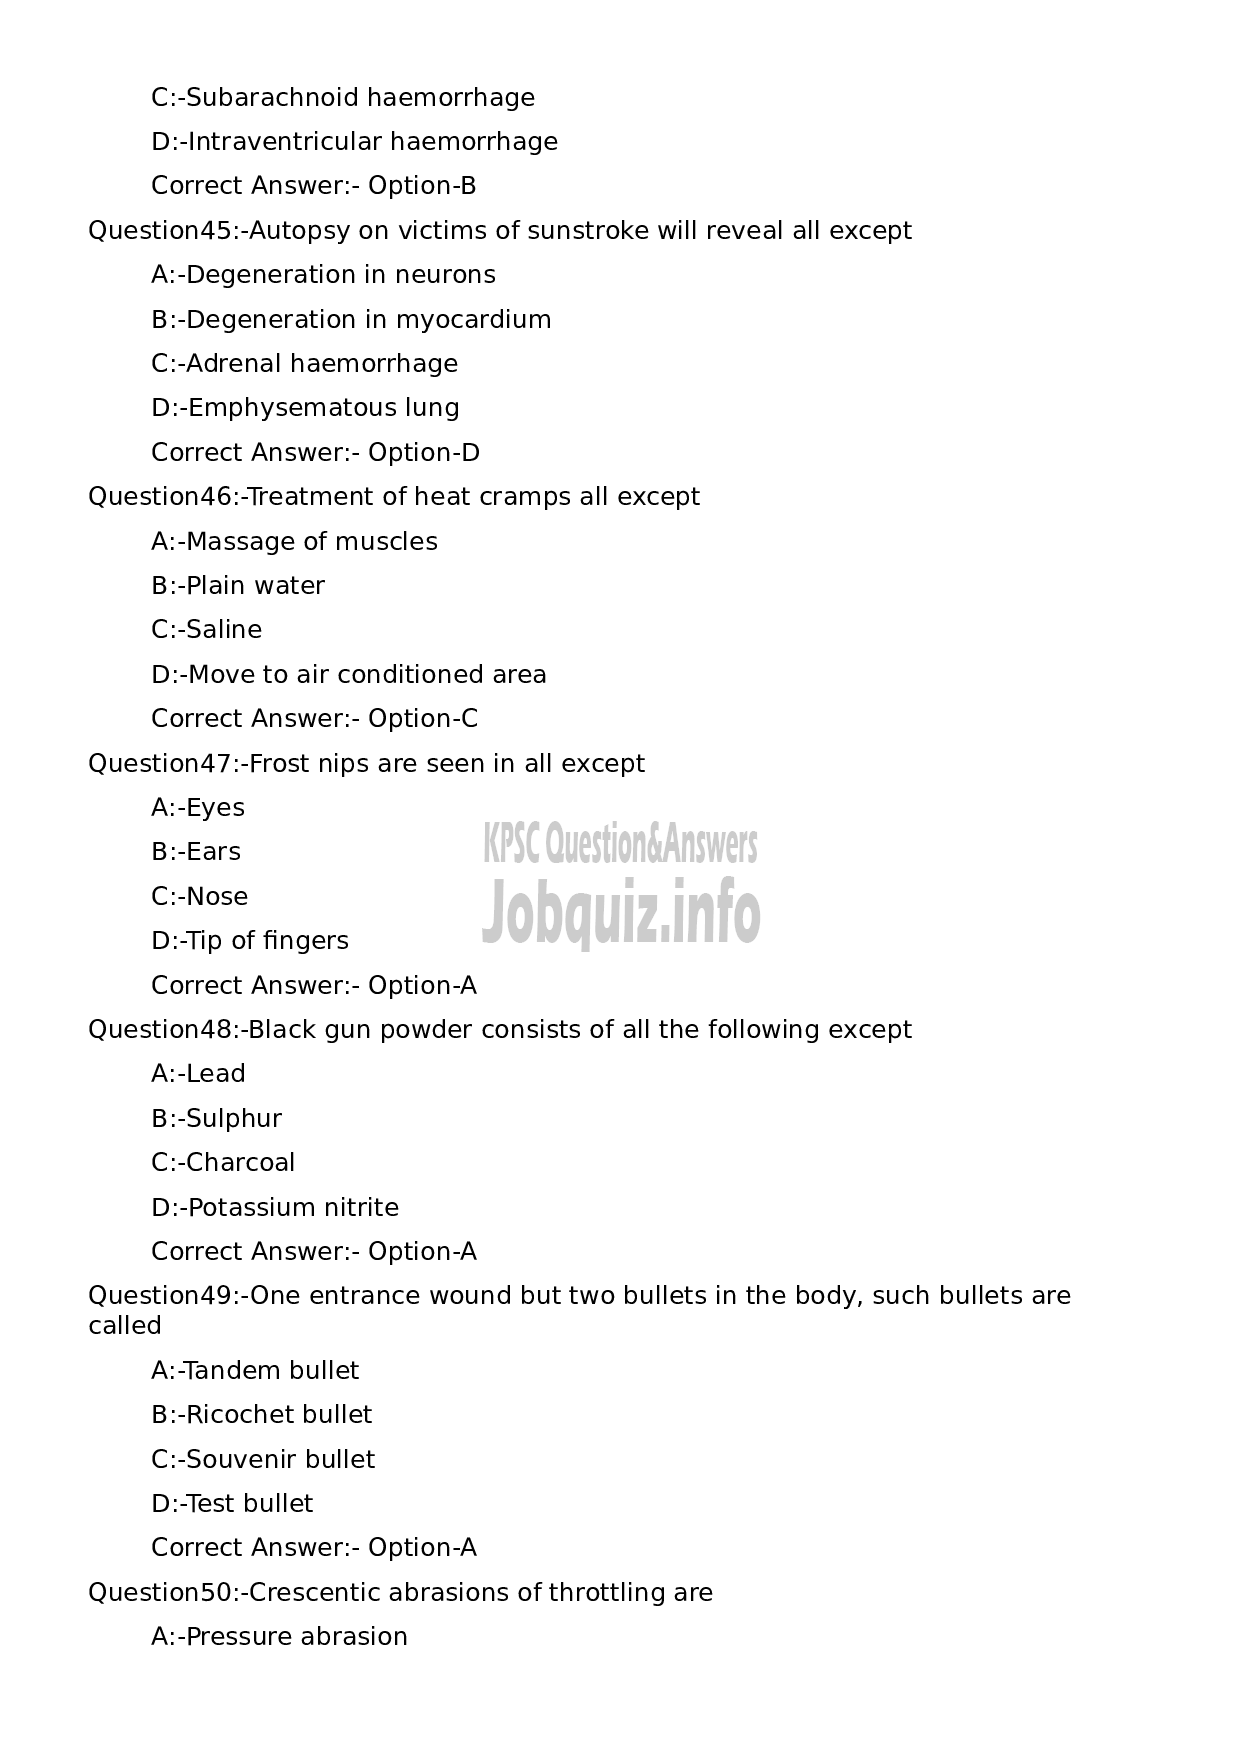 Kerala PSC Question Paper - Assistant Professor Forensic Medicine and Toxicology-9